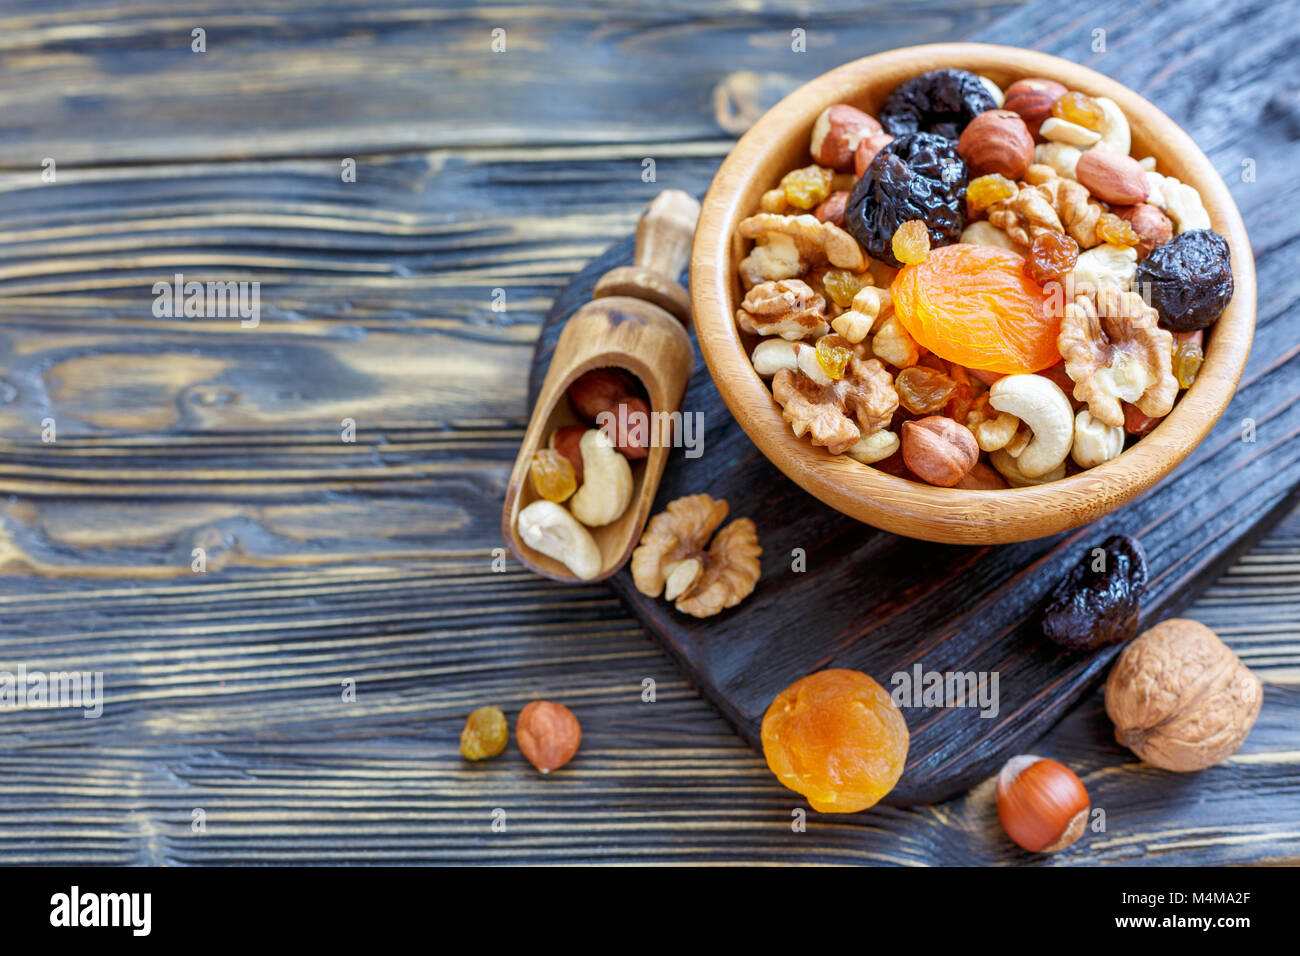 Nuts and dried fruit in a wooden bowl. Stock Photo